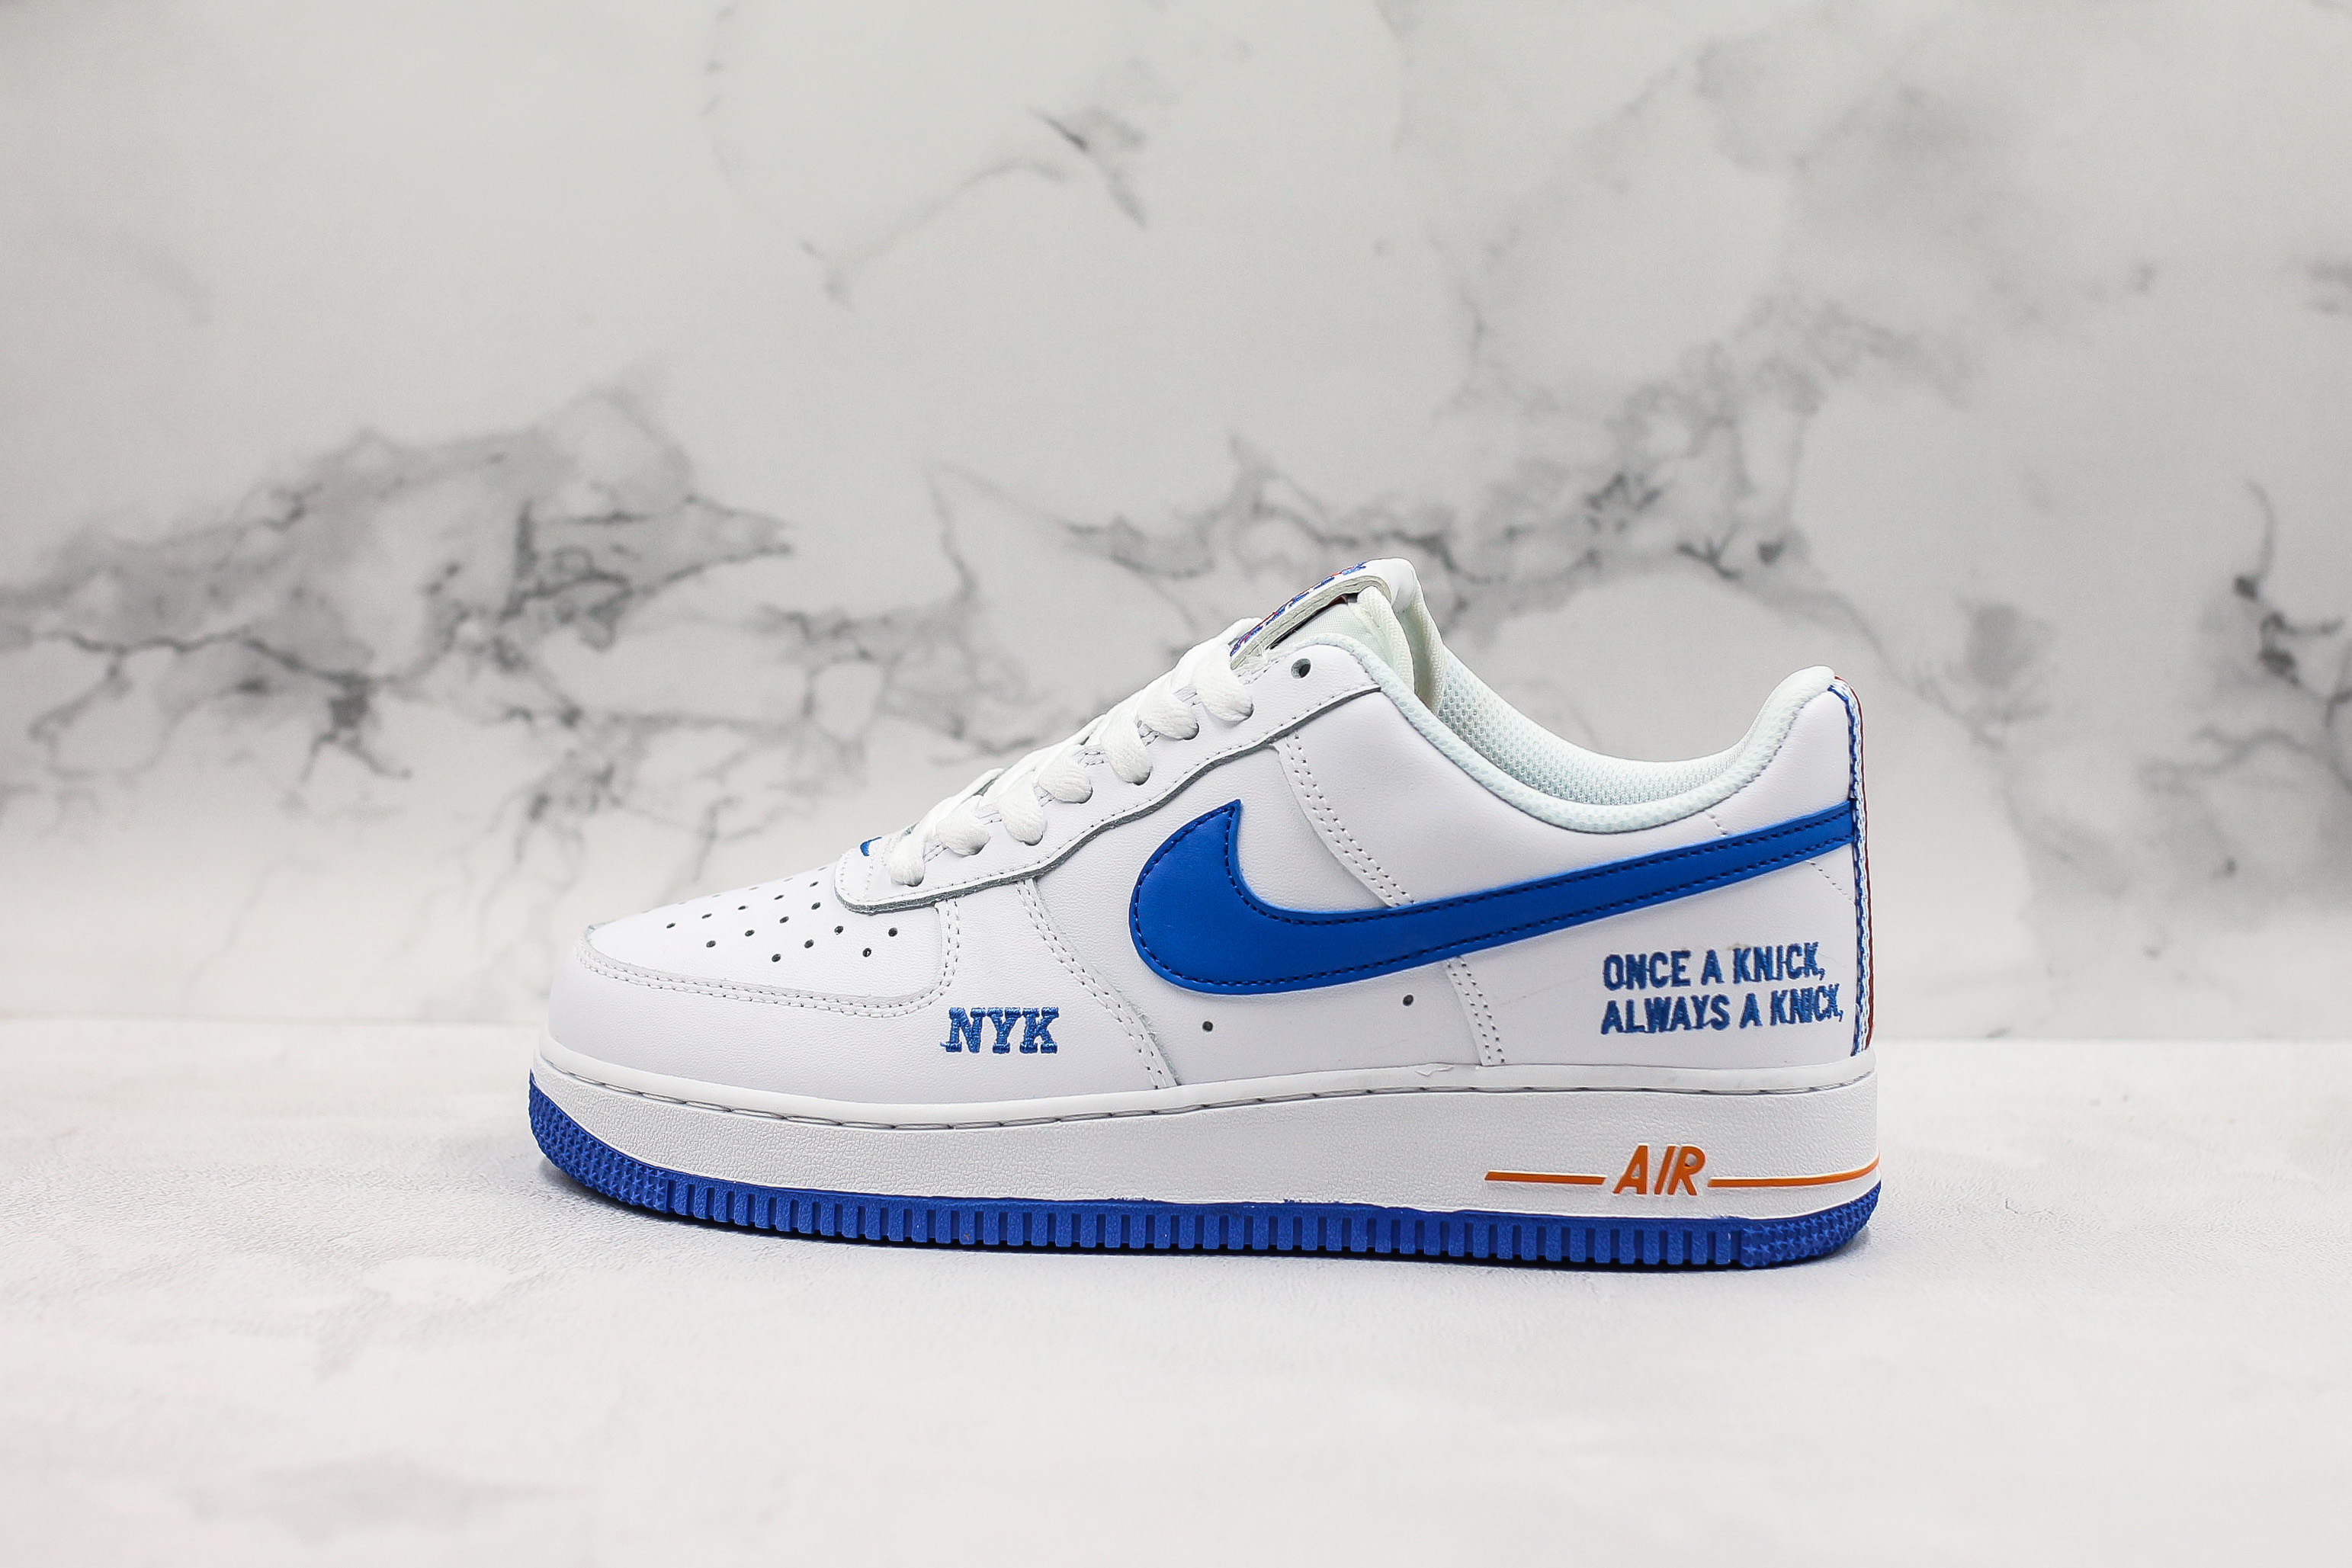 Nike Air Force 1 Low 'NYK' White Blue 